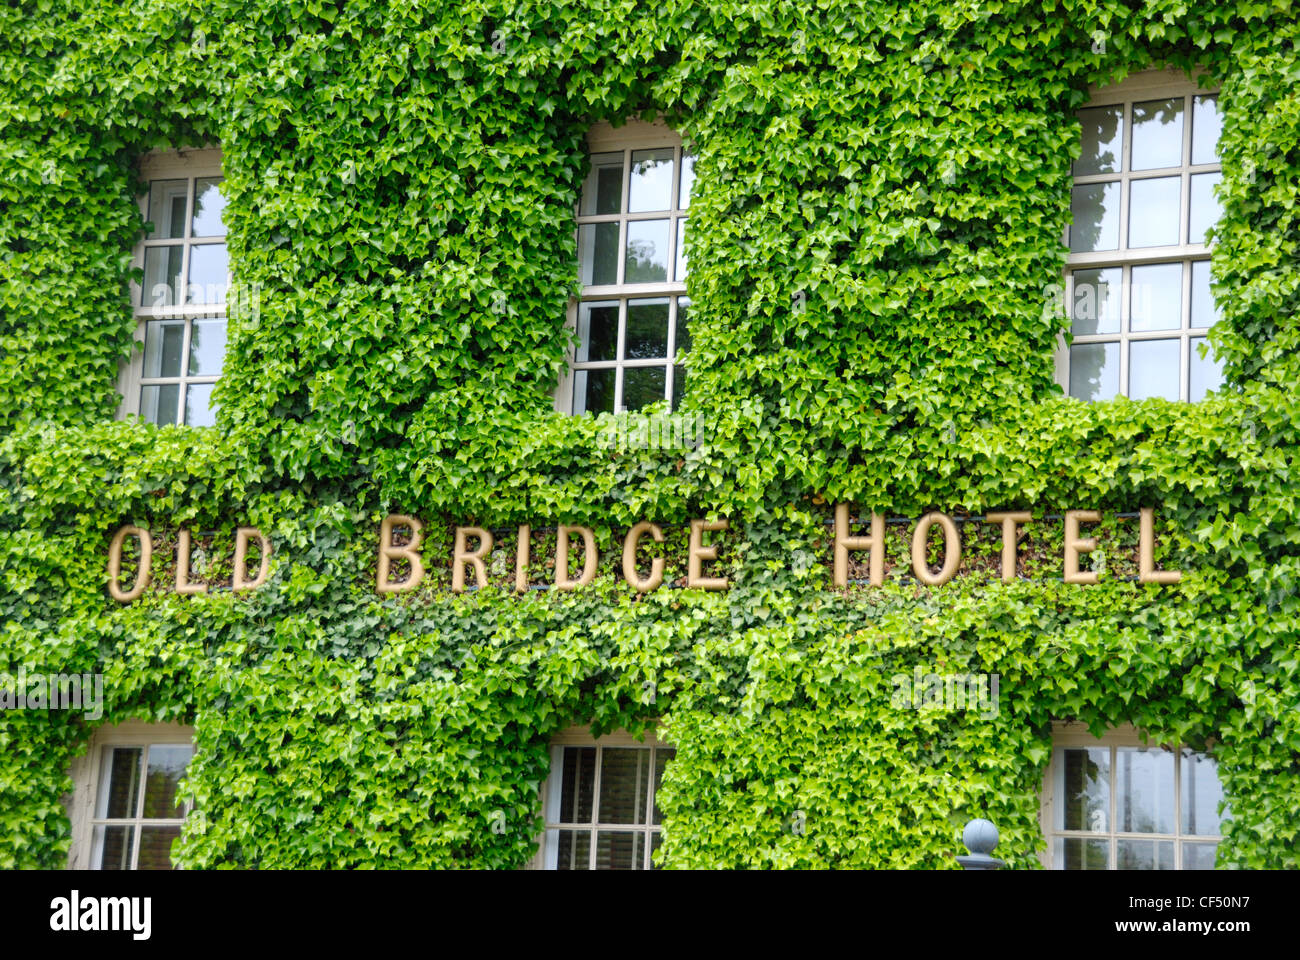 The ivy-clad facade of the The Old Bridge Hotel. Stock Photo